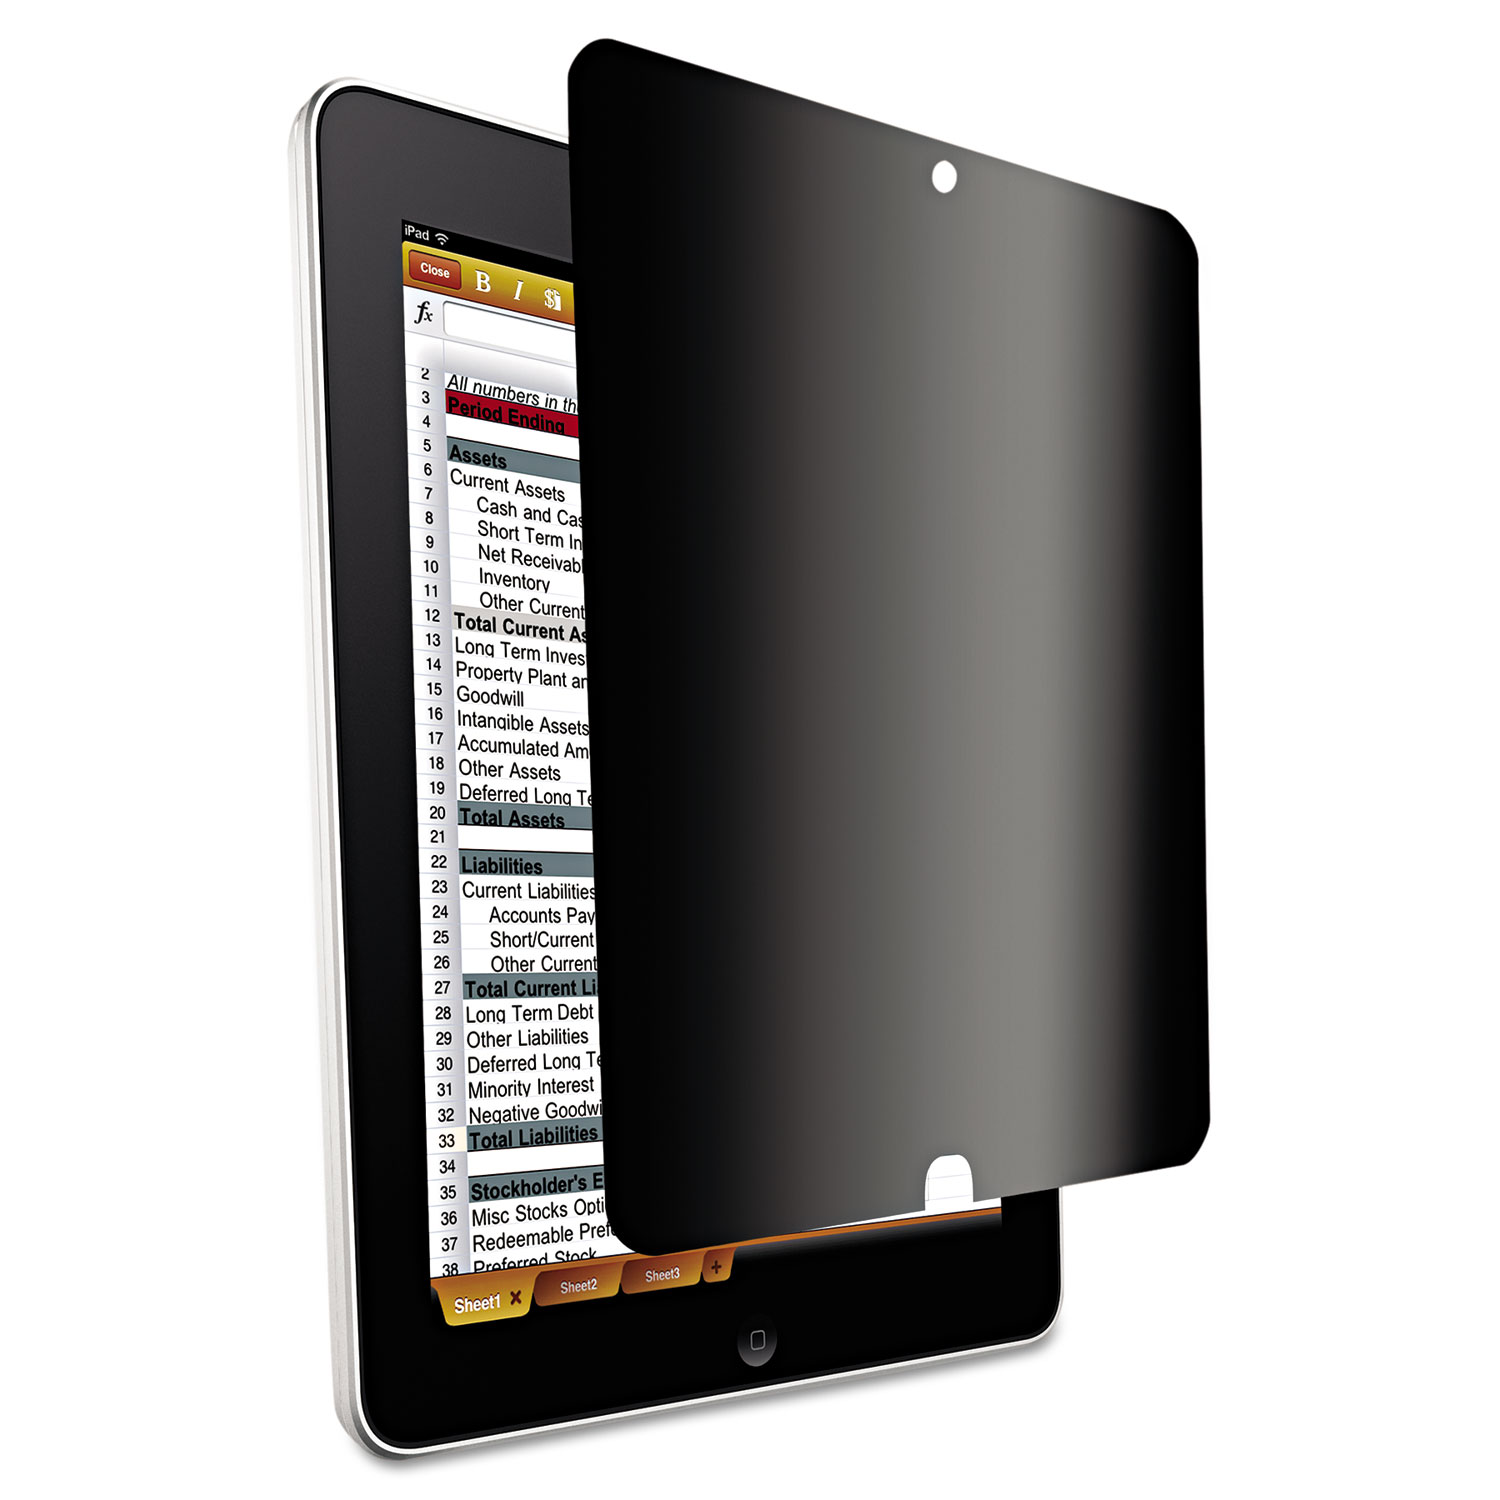 Secure-View Four-Way Privacy Filter for iPad 2/3rd Gen, Black